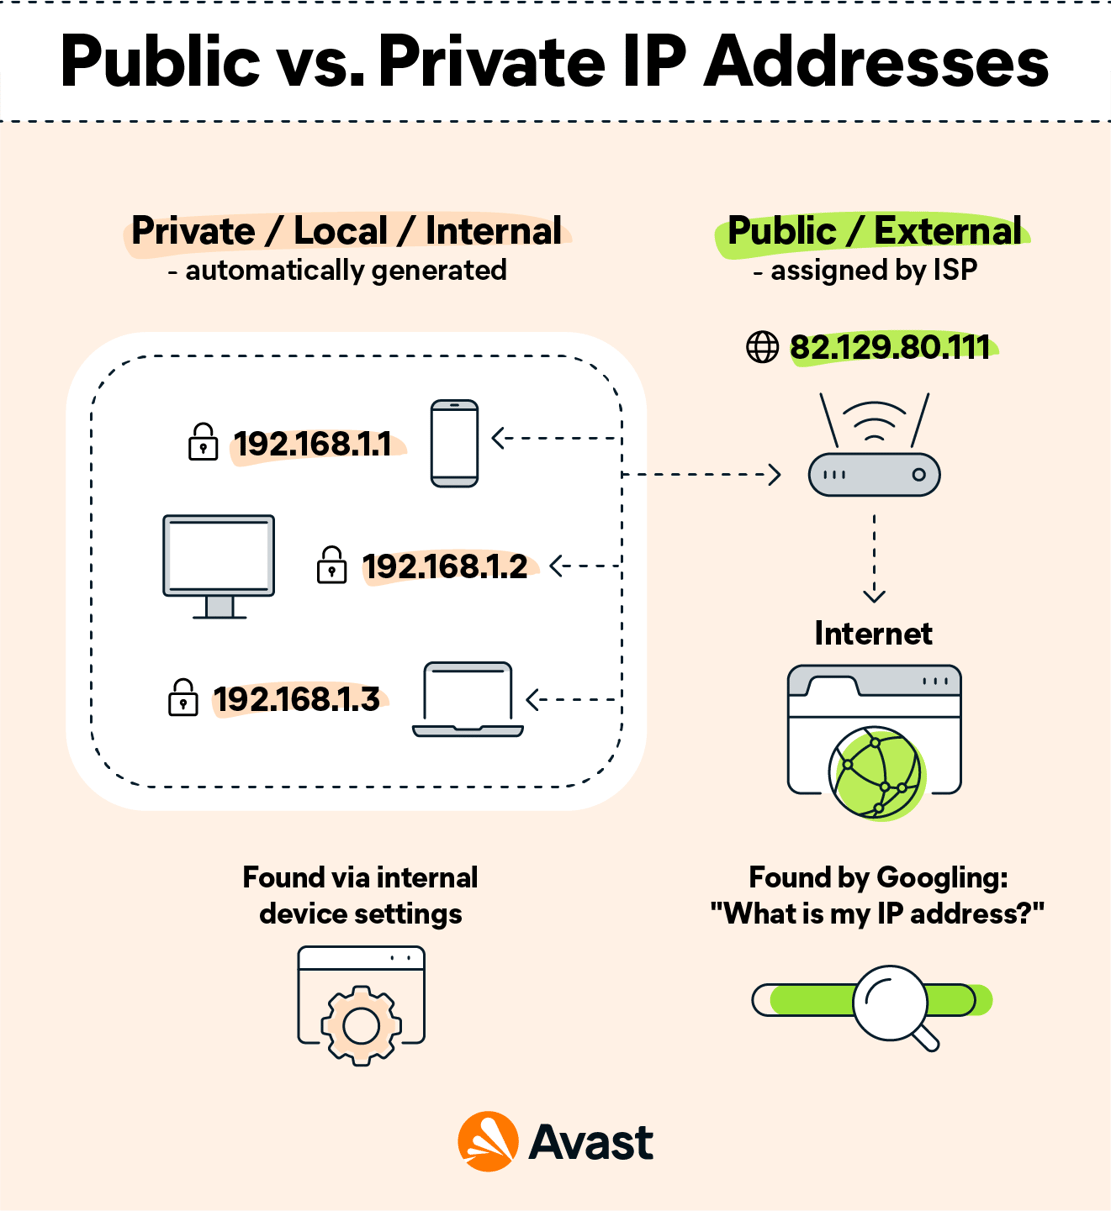 Should I keep my IP address private?